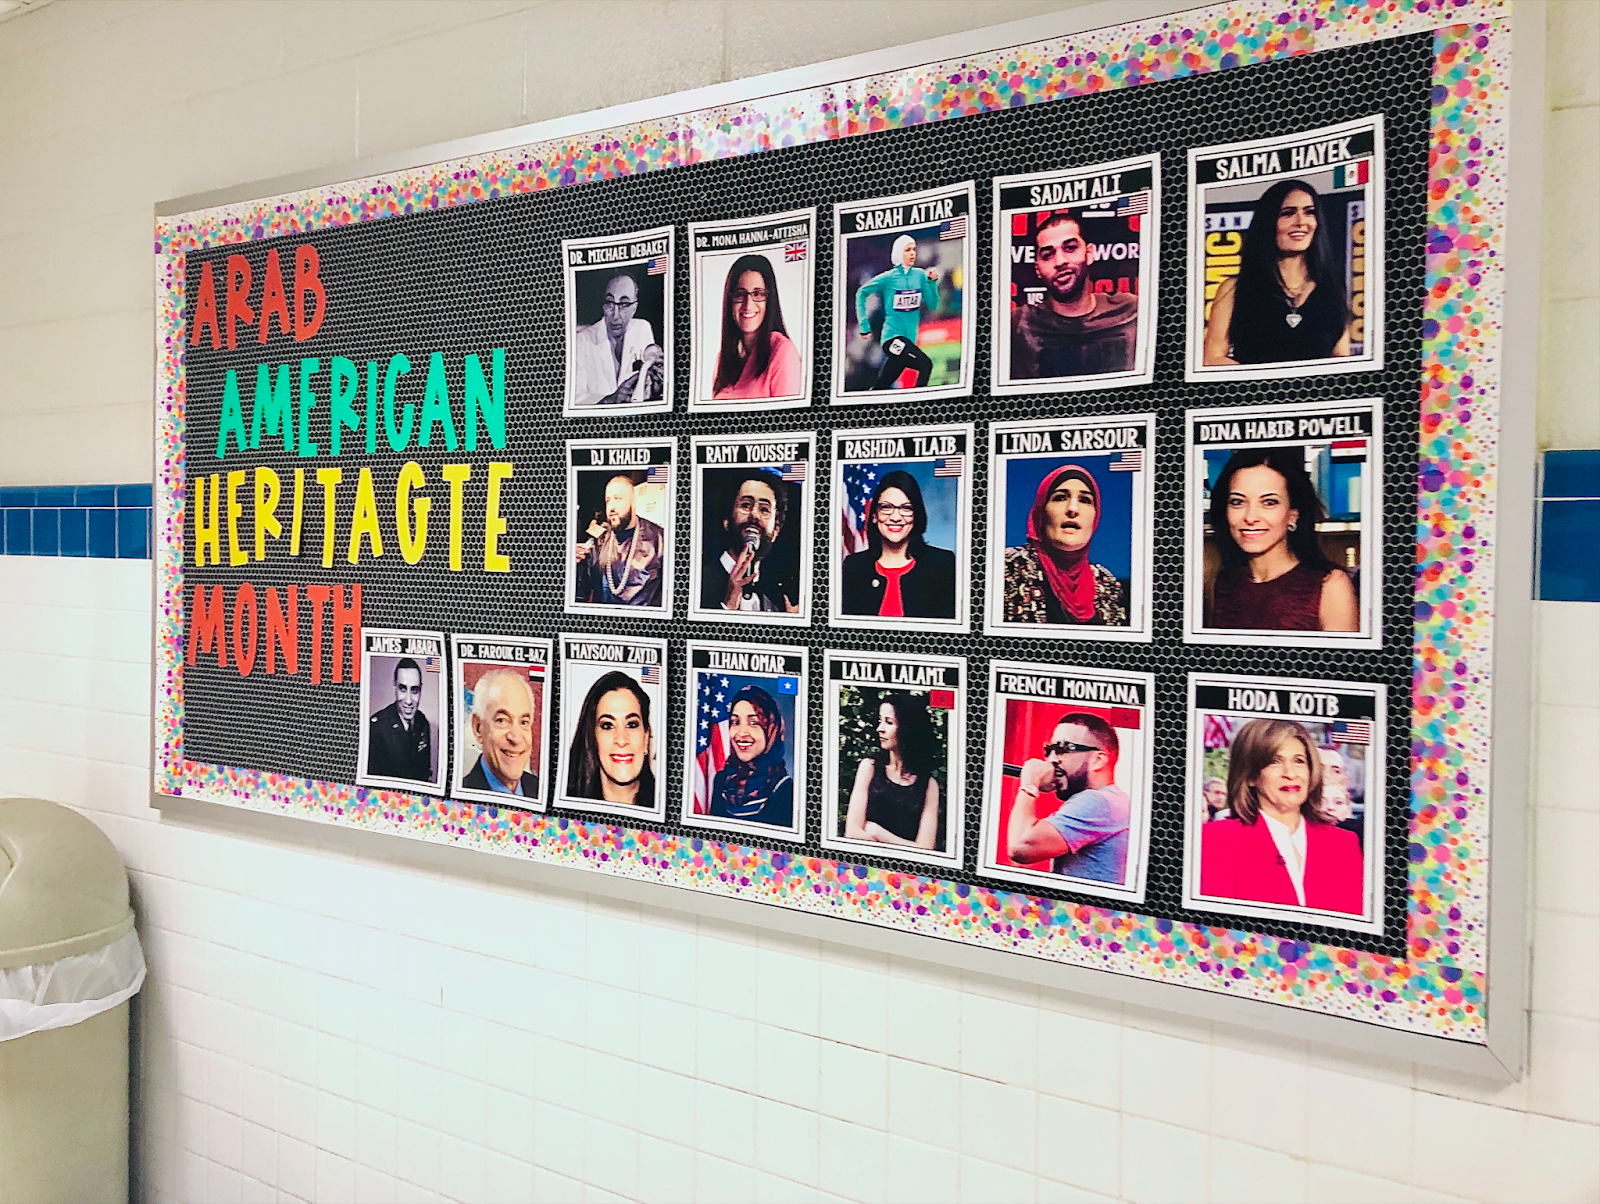 An Arab American Heritage Month display set up in the Blue hall in advance of April.